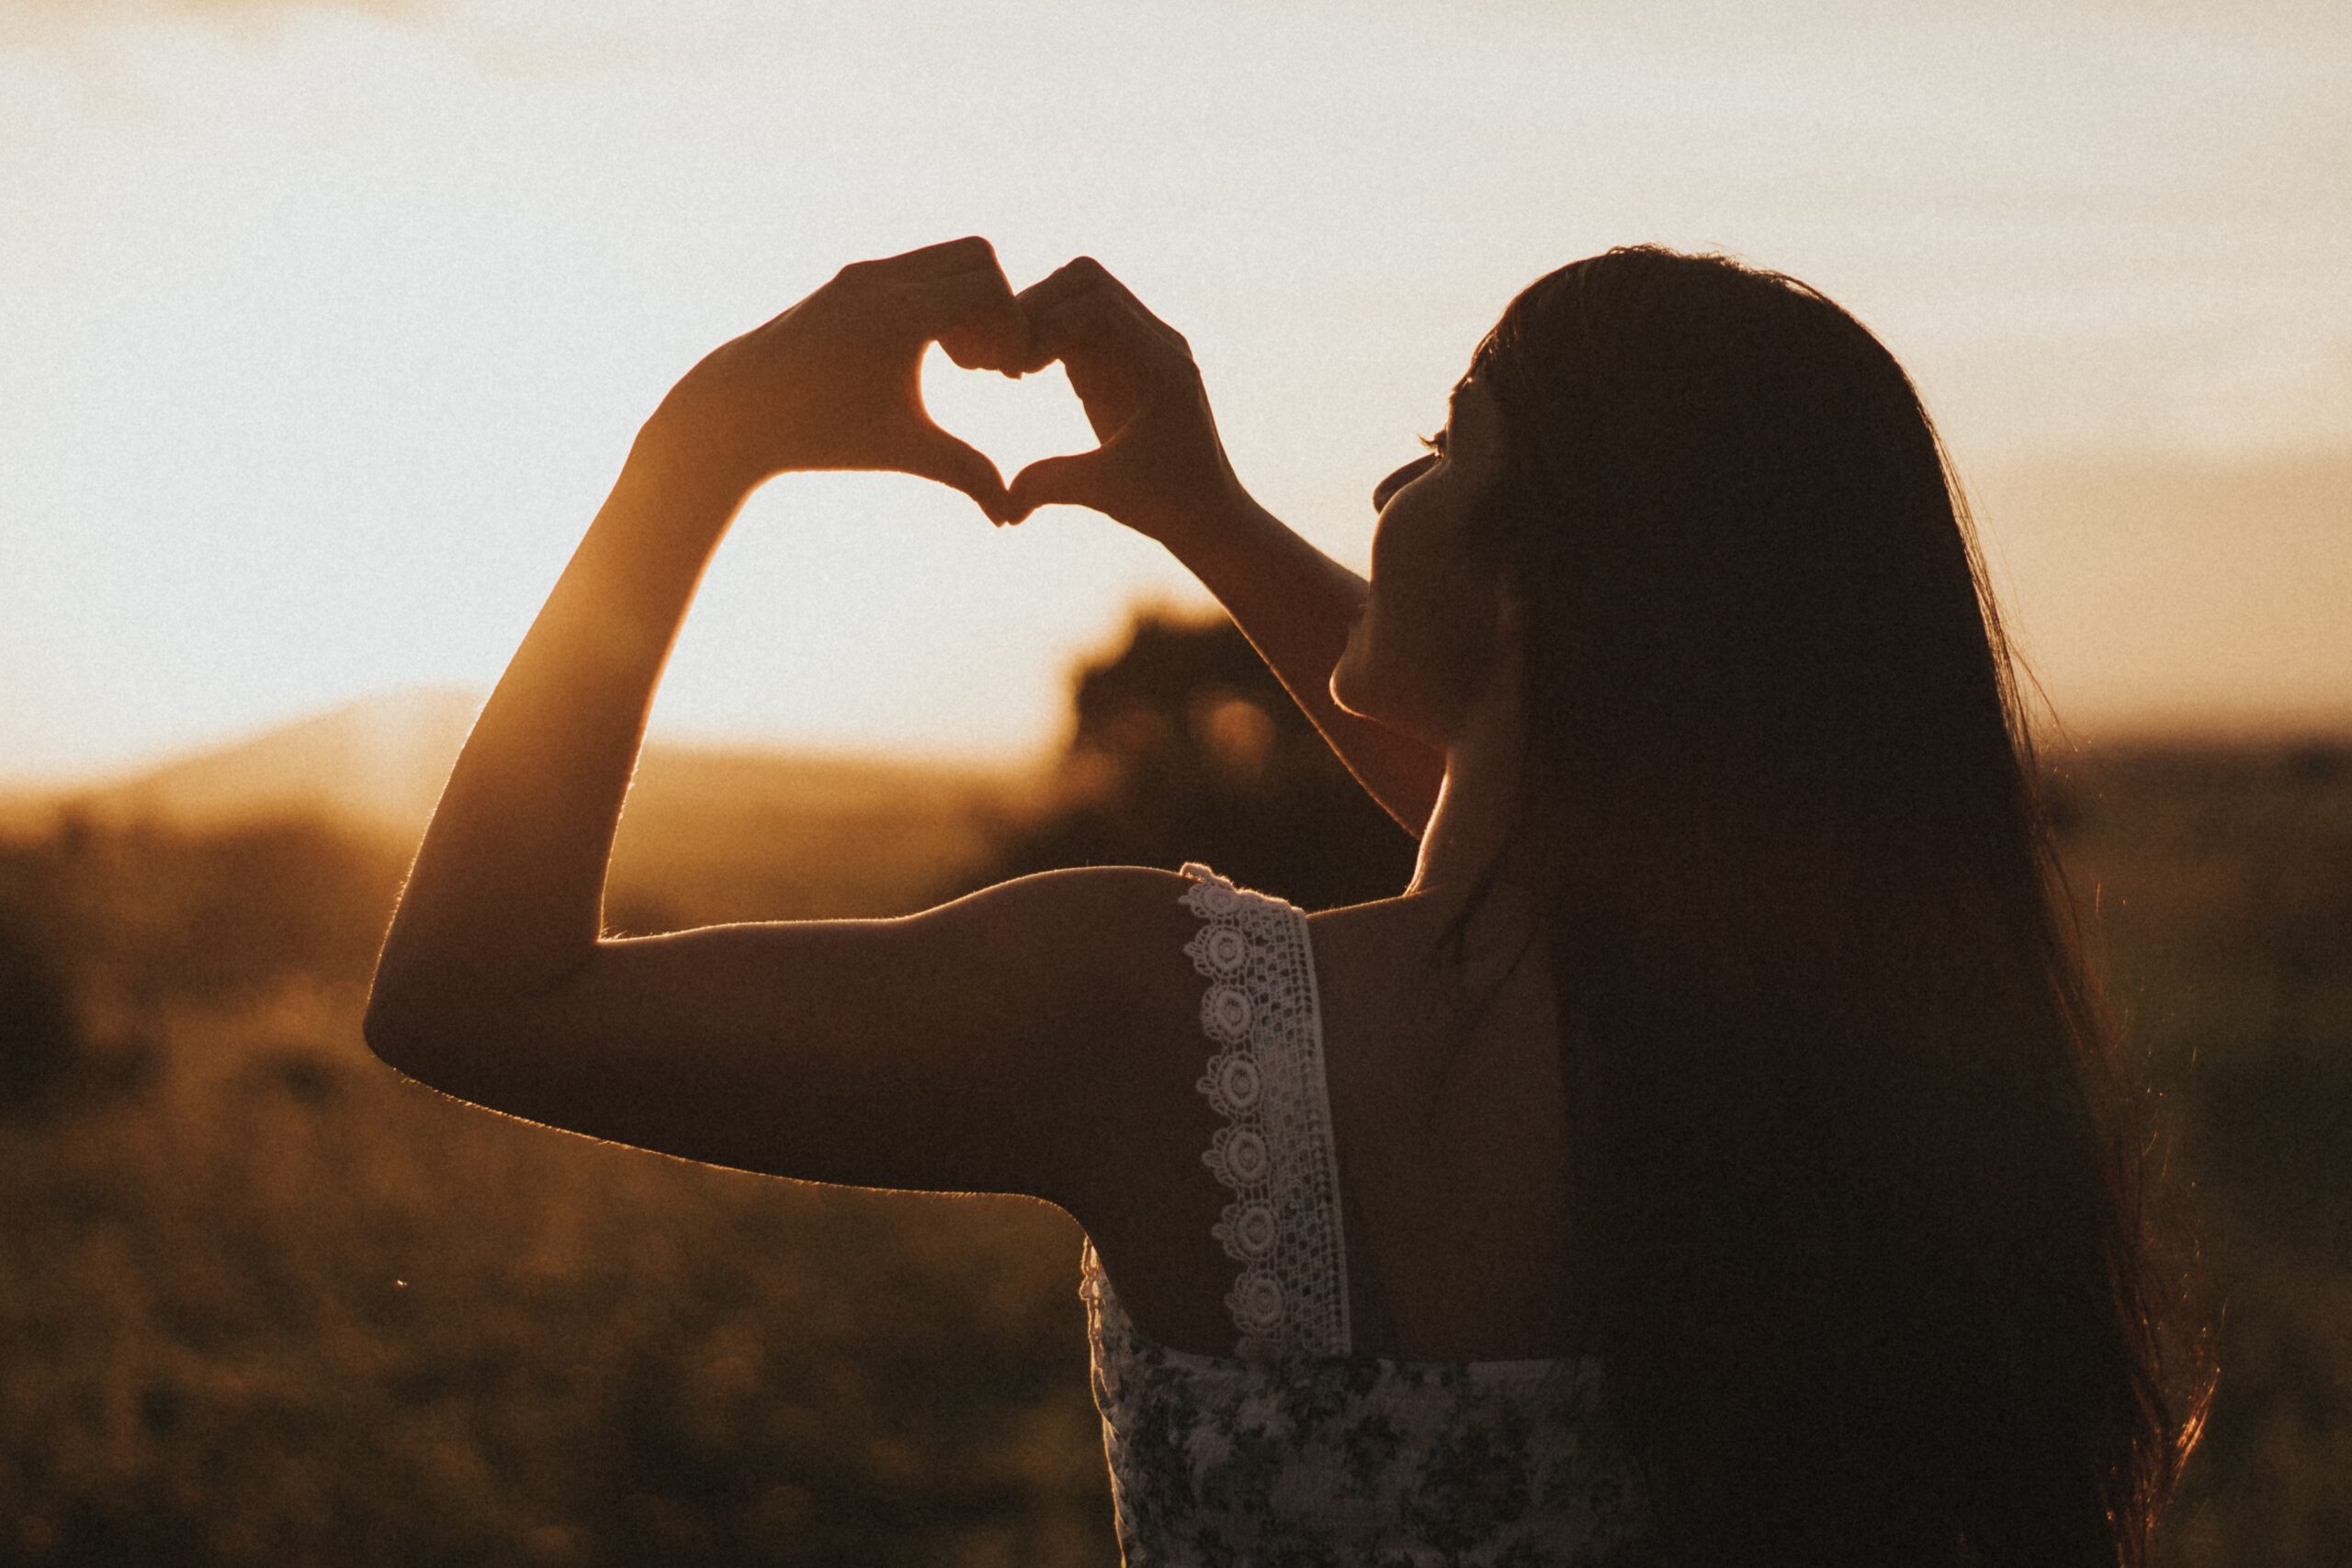 A Woman Making Heart From Her Hand Infront of Sunset.